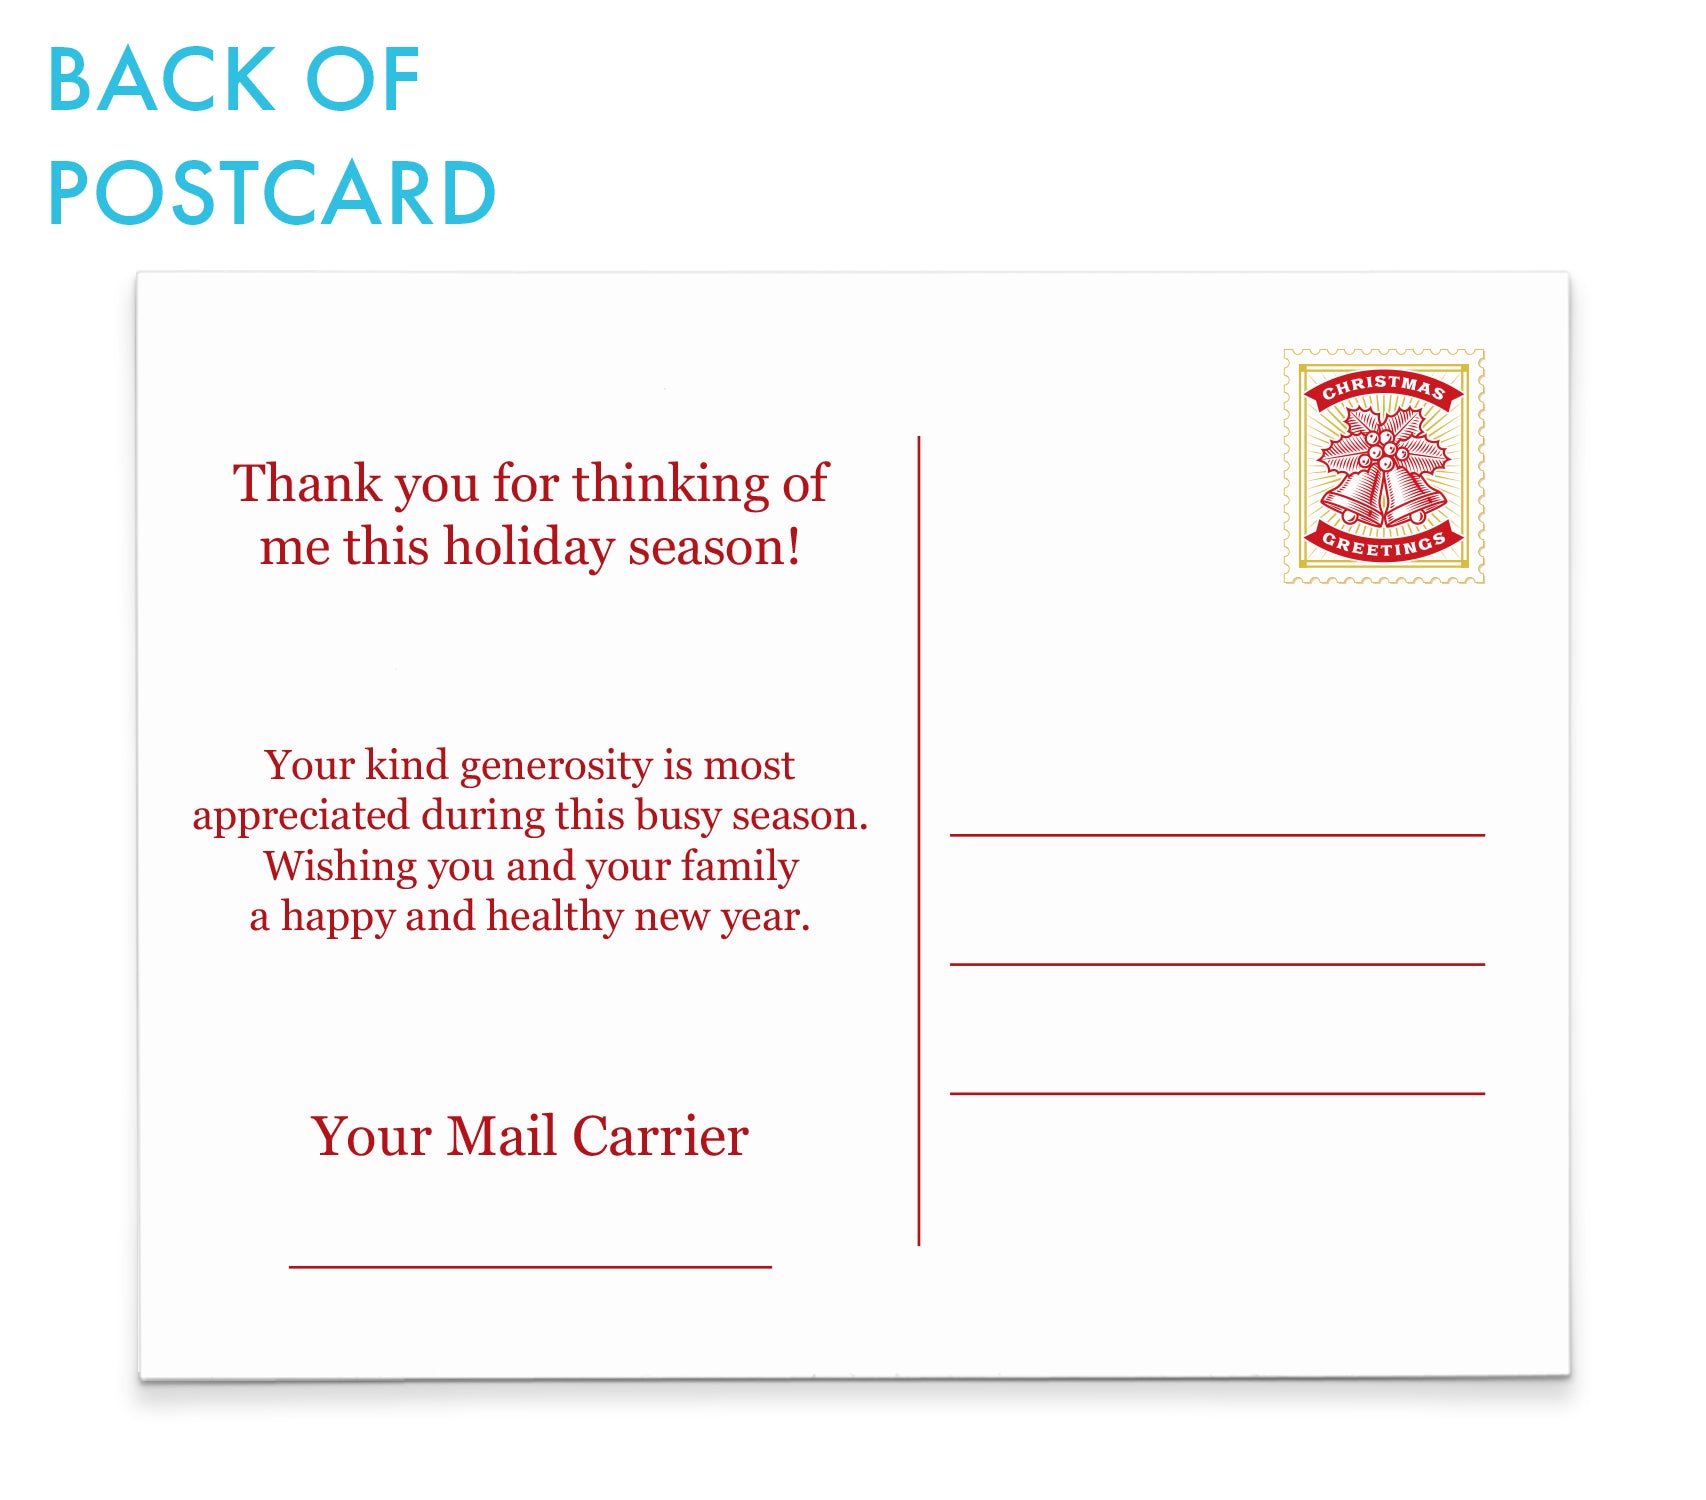    HGC011 Happy Holiday Postcards for Mail Carrier with Holiday Mail christmas tree drop box presents gifts usps